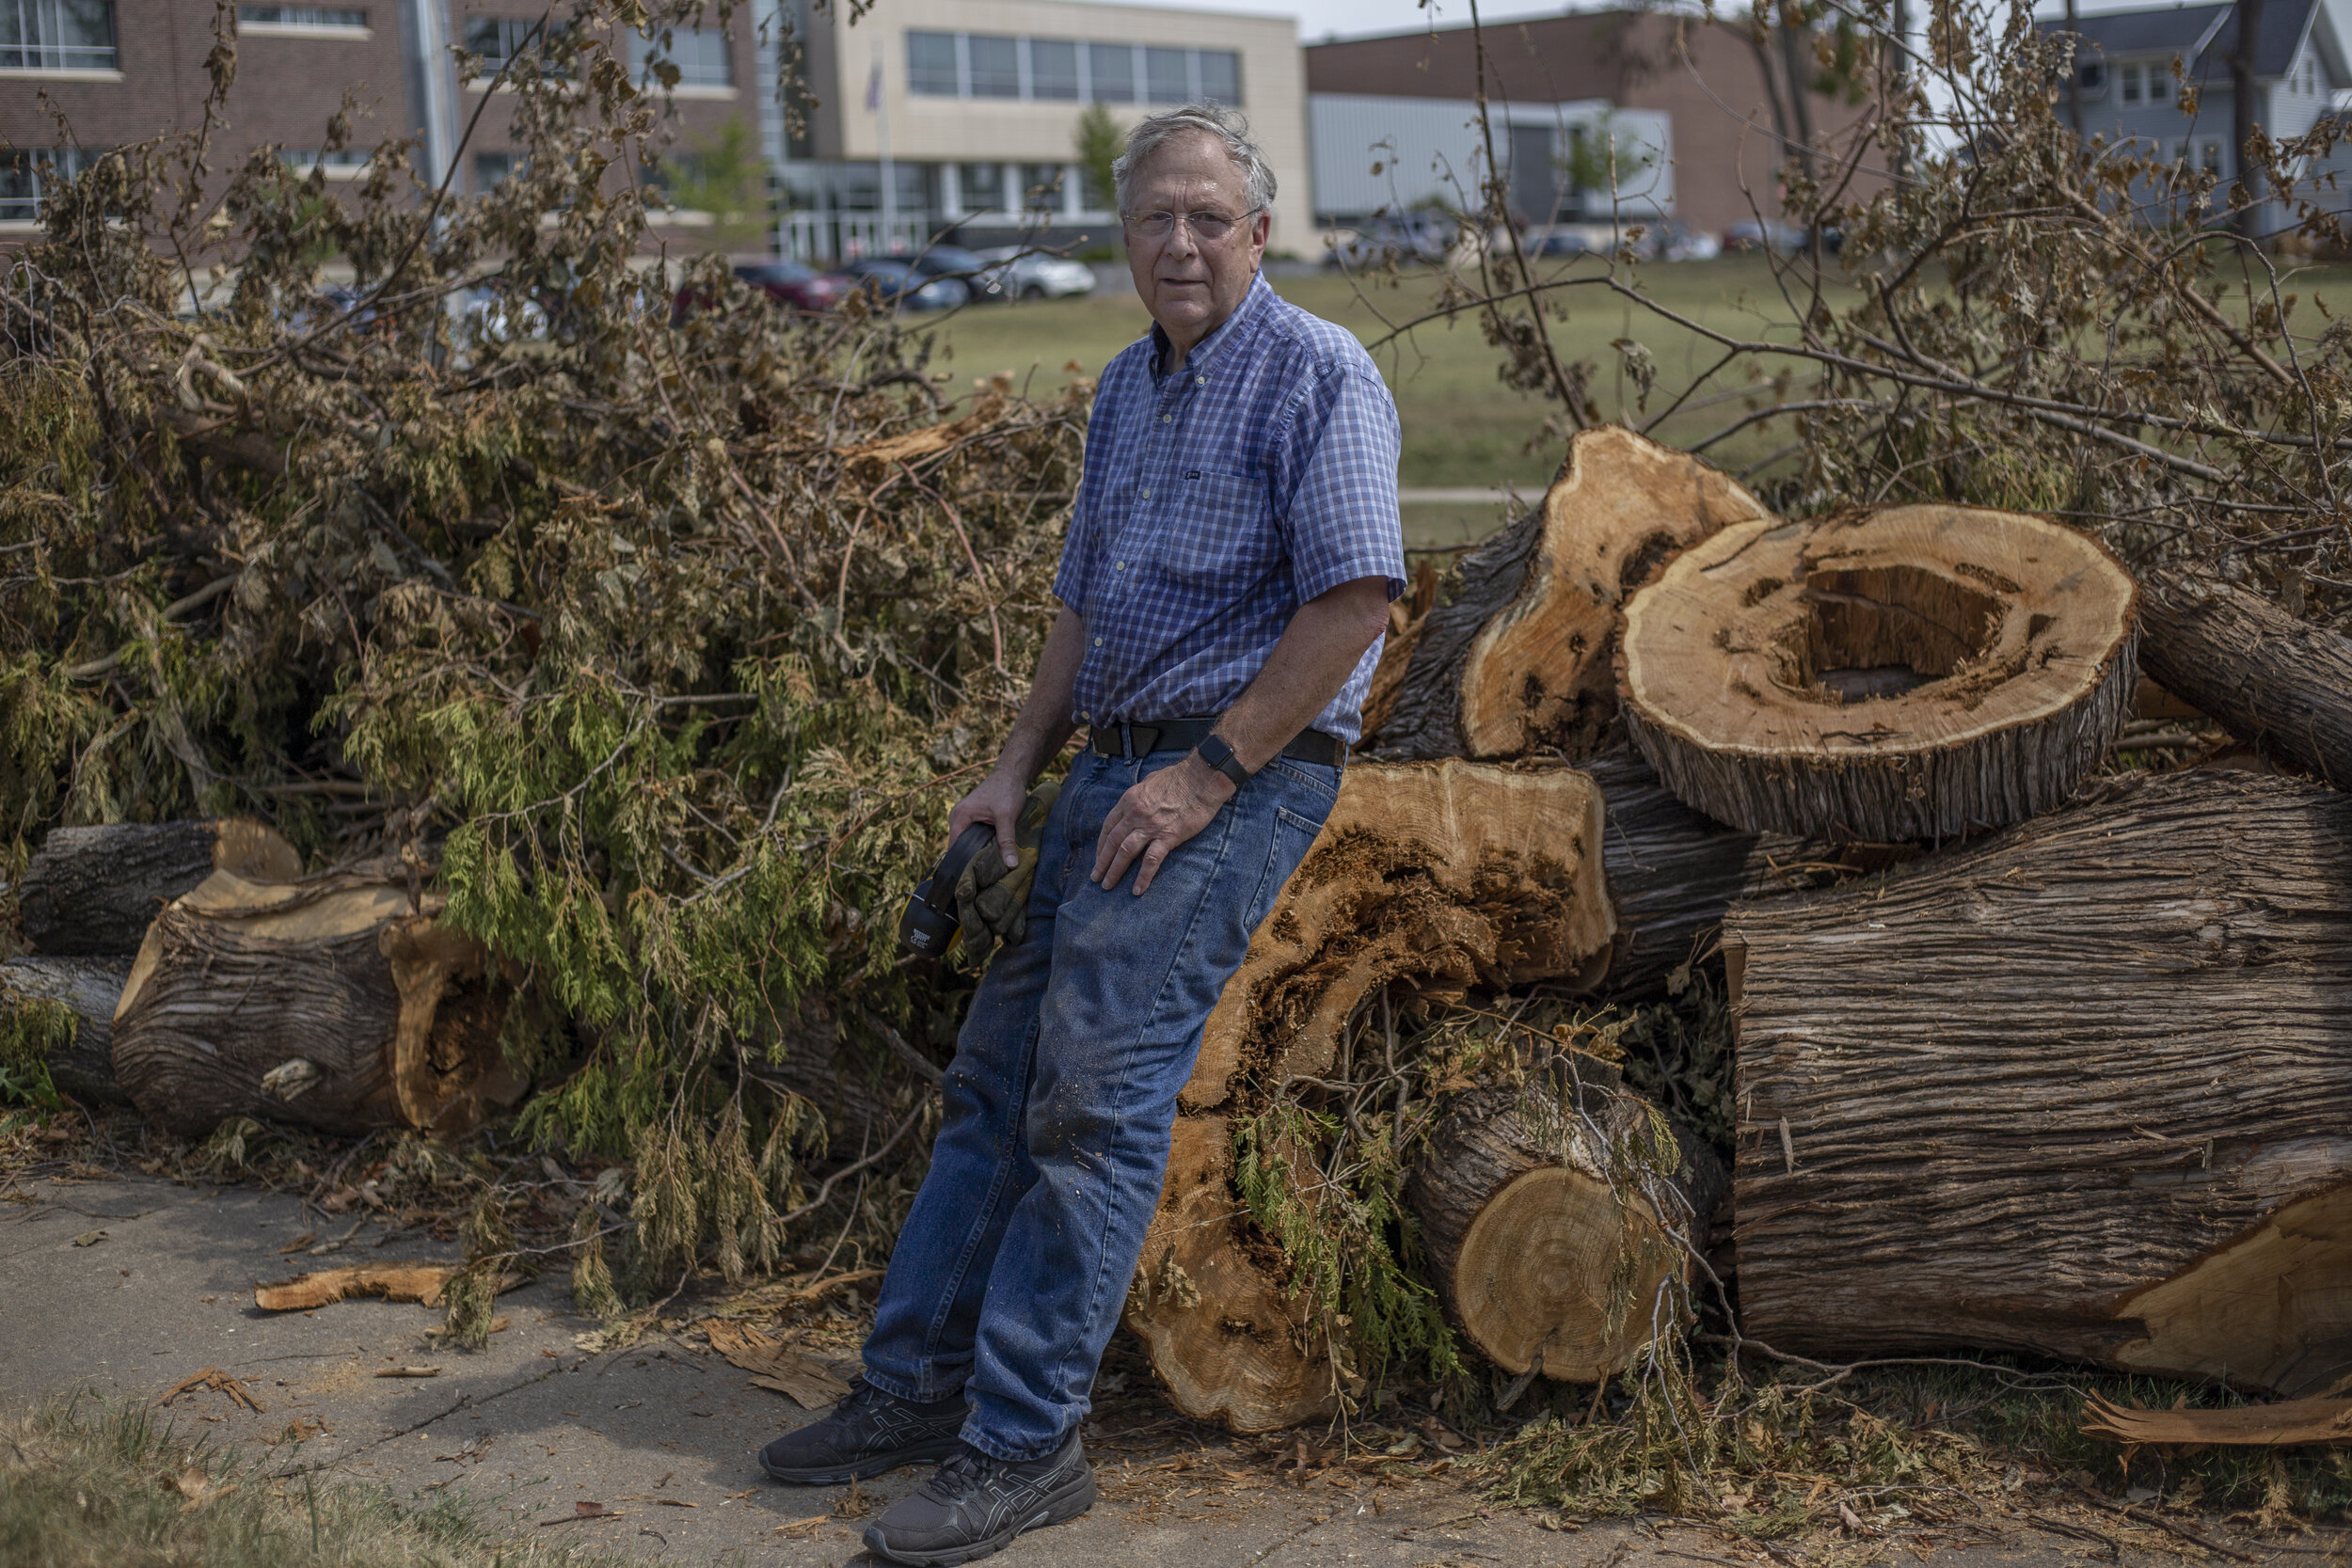  Ron Thatcher takes a break from yard work in front of his home on Saturday, August 28th, 2020 in Marion, Iowa. Thatcher, who has lived in Marion for 50 years, had to cut down multiple trees in his yard after they fell and caused structural damage to